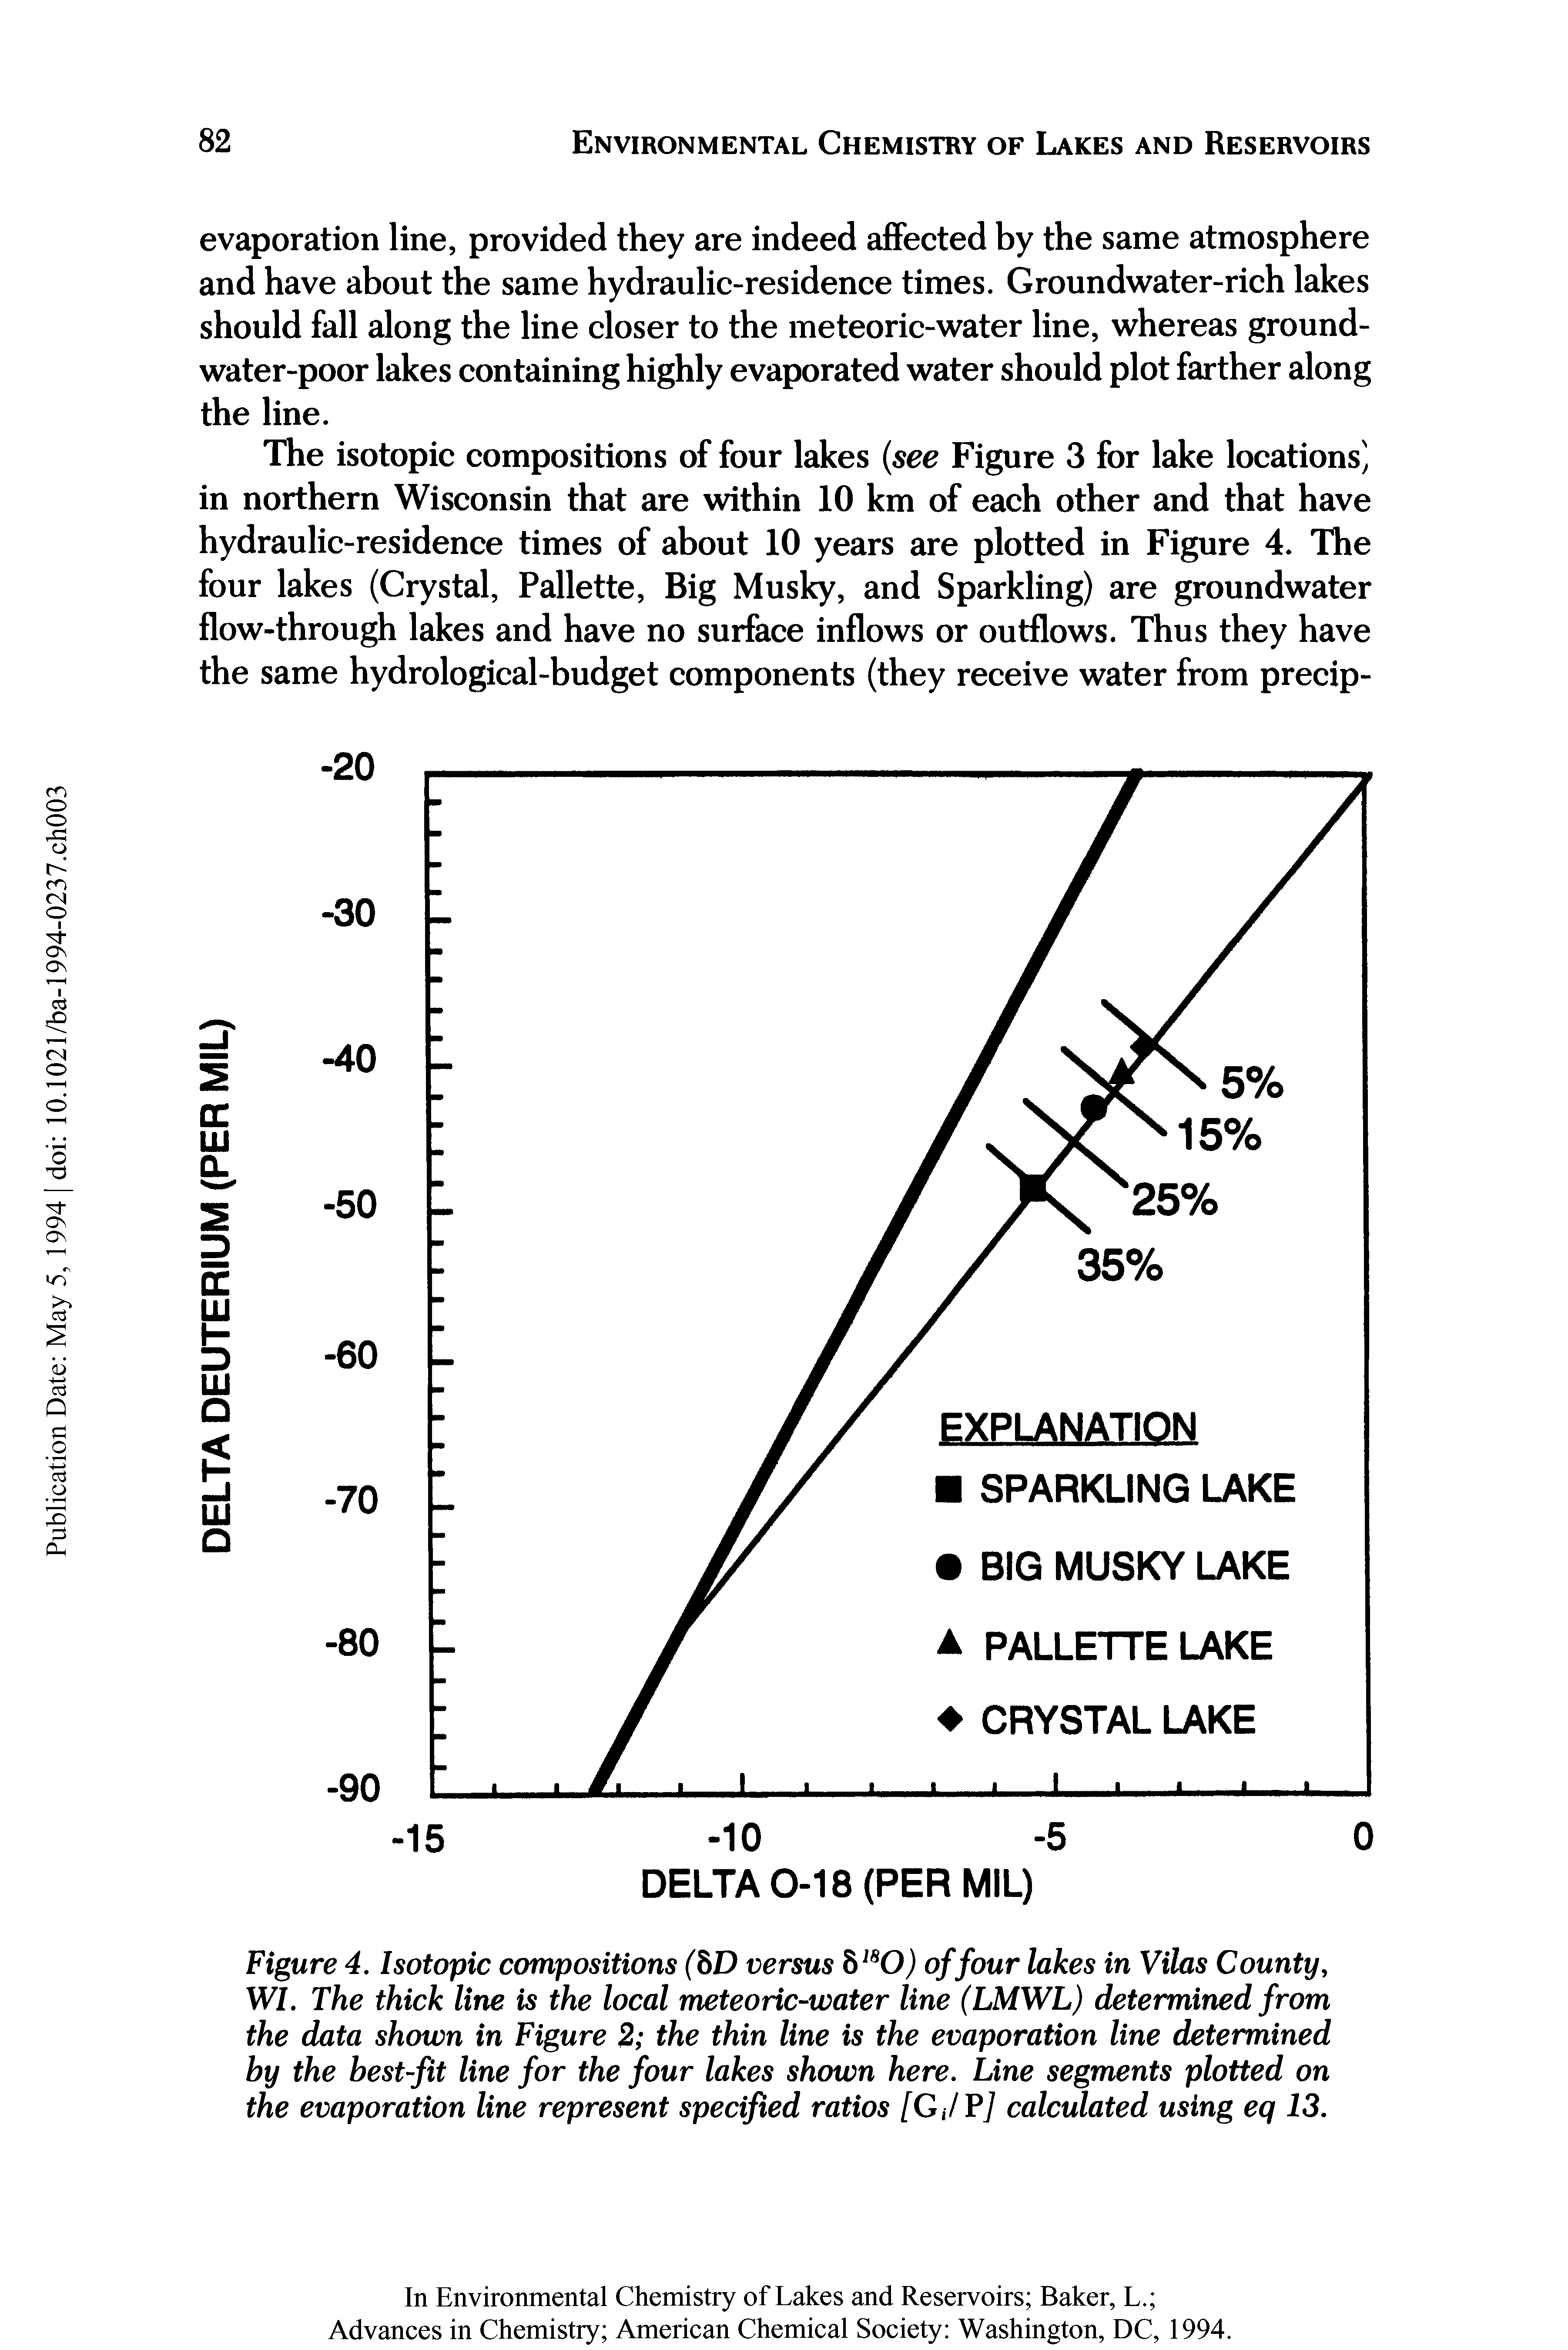 Figure 4. Isotopic compositions (bD versus b180) of four lakes in Vilas County, WI. The thick line is the local meteoric-water line (LMWL) determined from the data shown in Figure 2 the thin line is the evaporation line determined by the best-fit line for the four lakes shown here. Line segments plotted on the evaporation line represent specified ratios [GJ P/ calculated using eq 13.